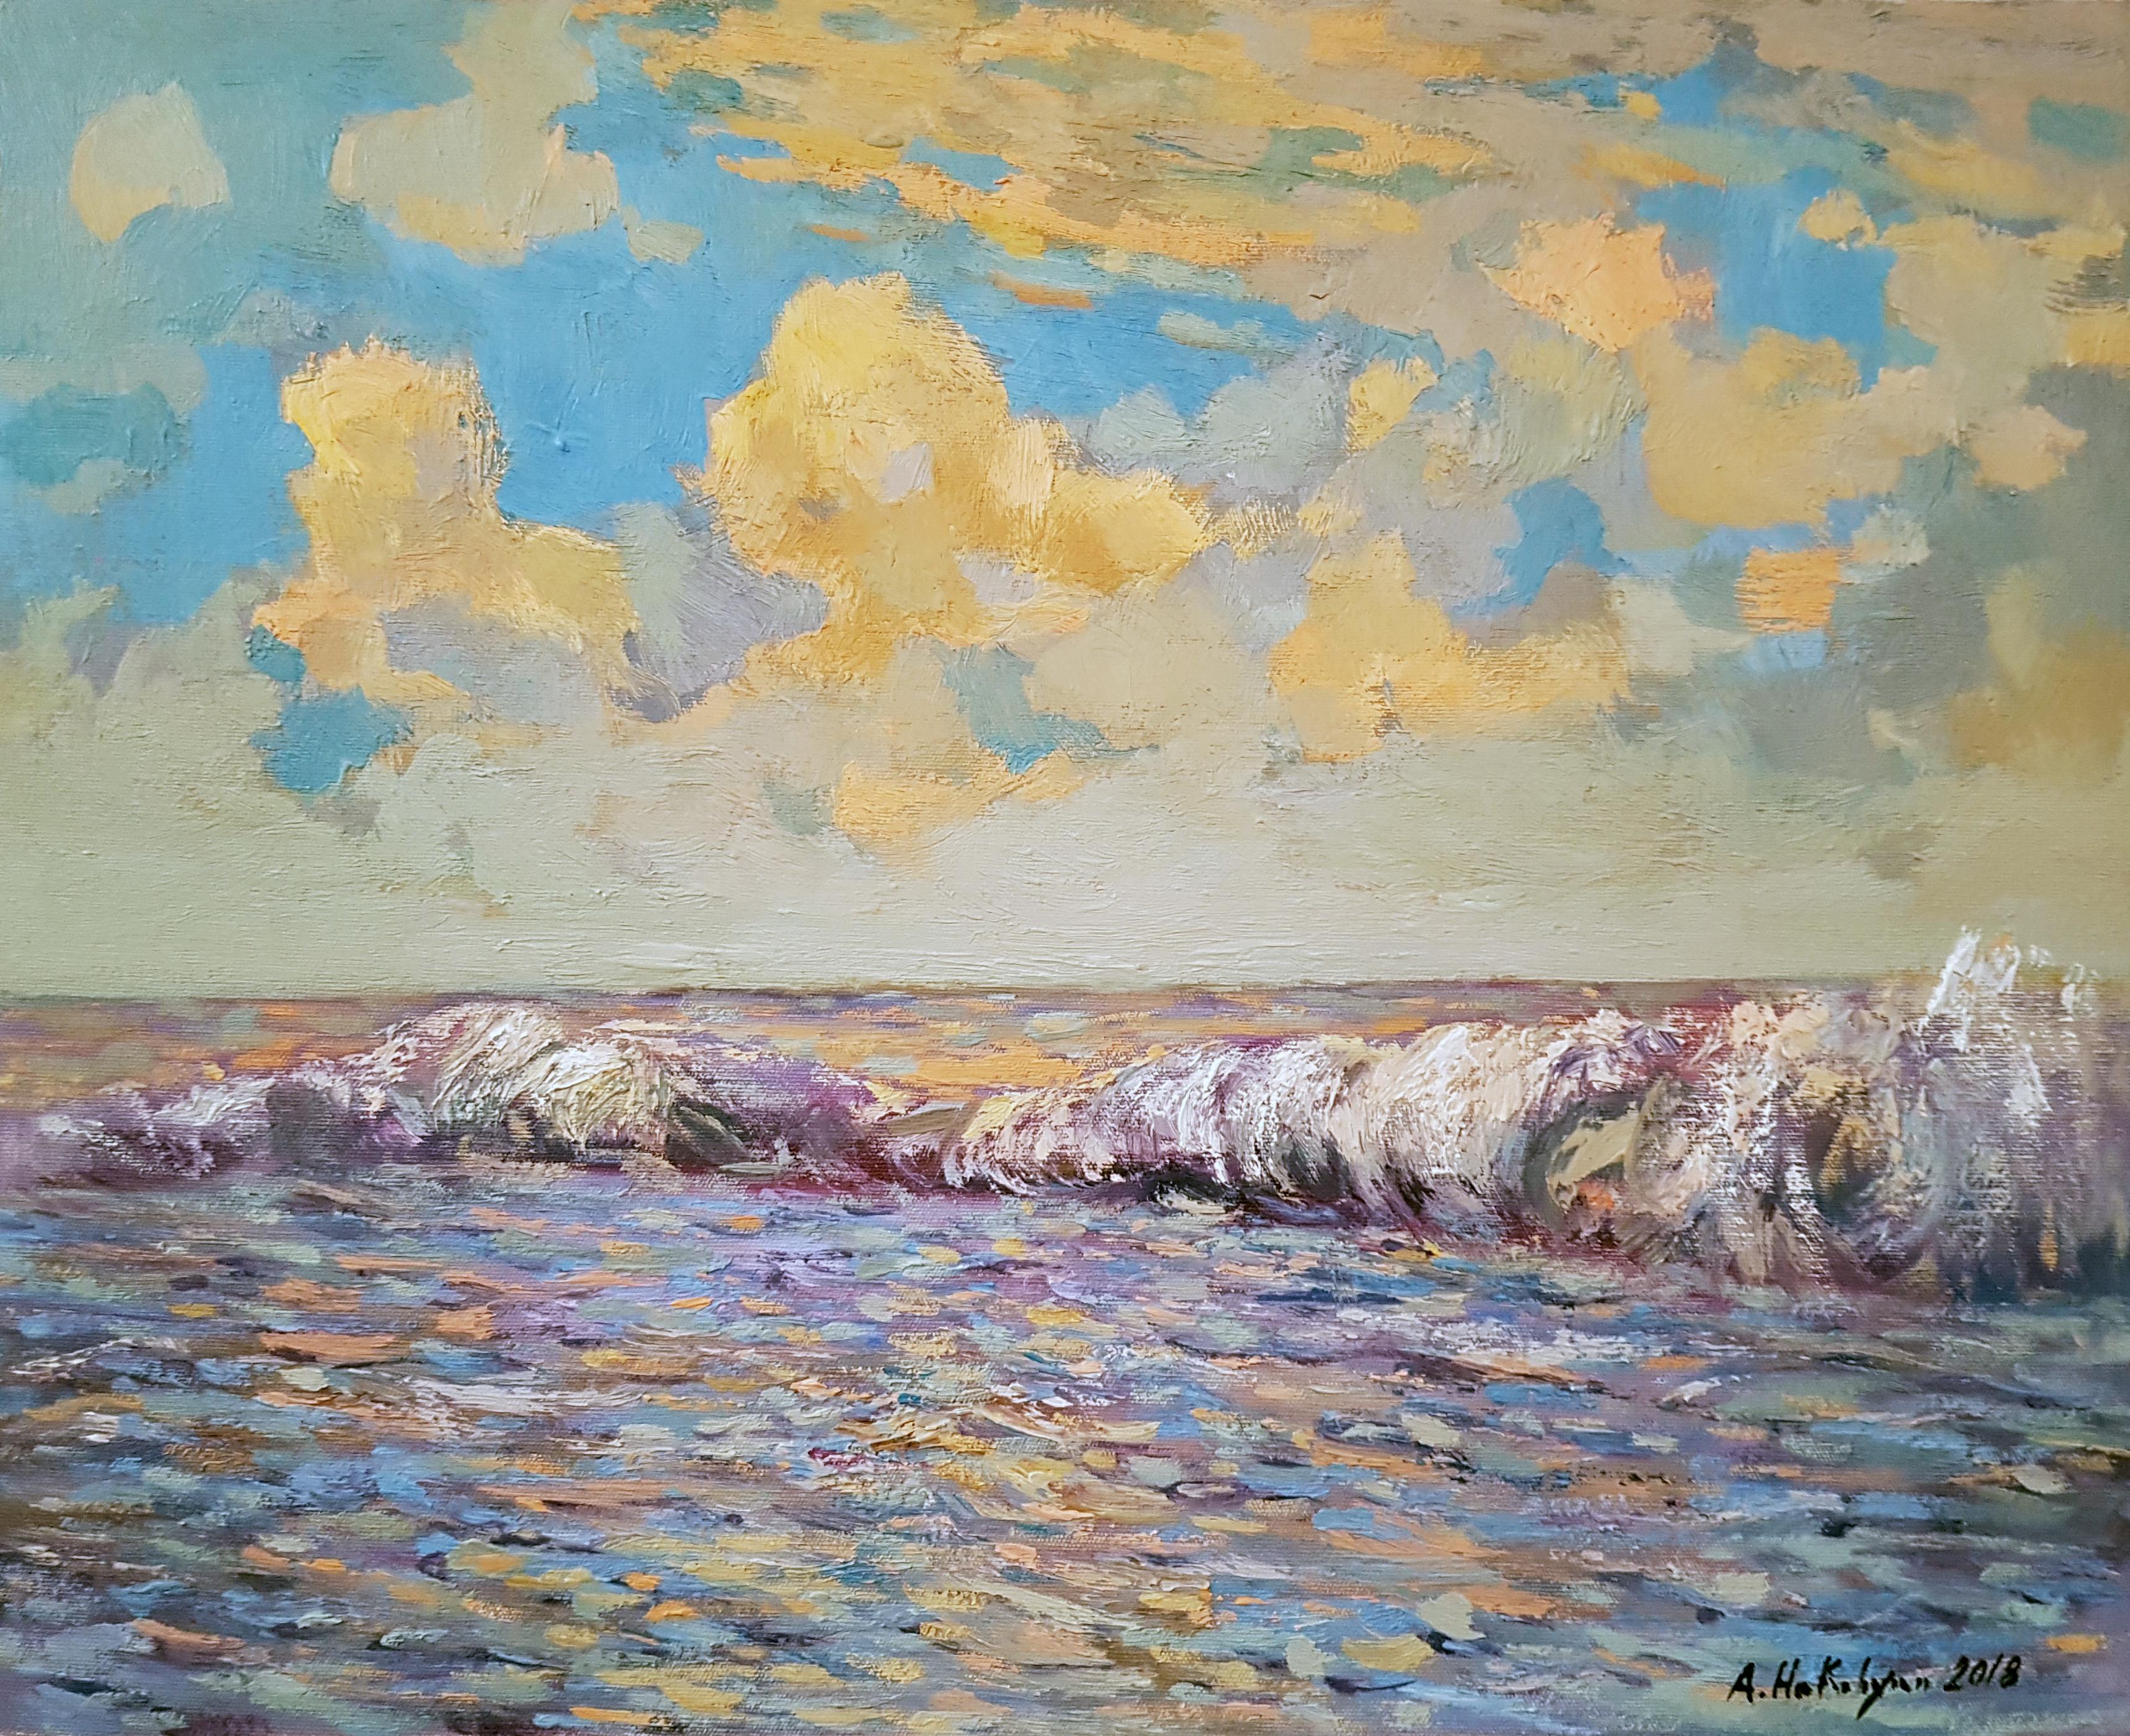 The Wave, Coastal, Impressionism, Original Oil Painting, One of a Kind